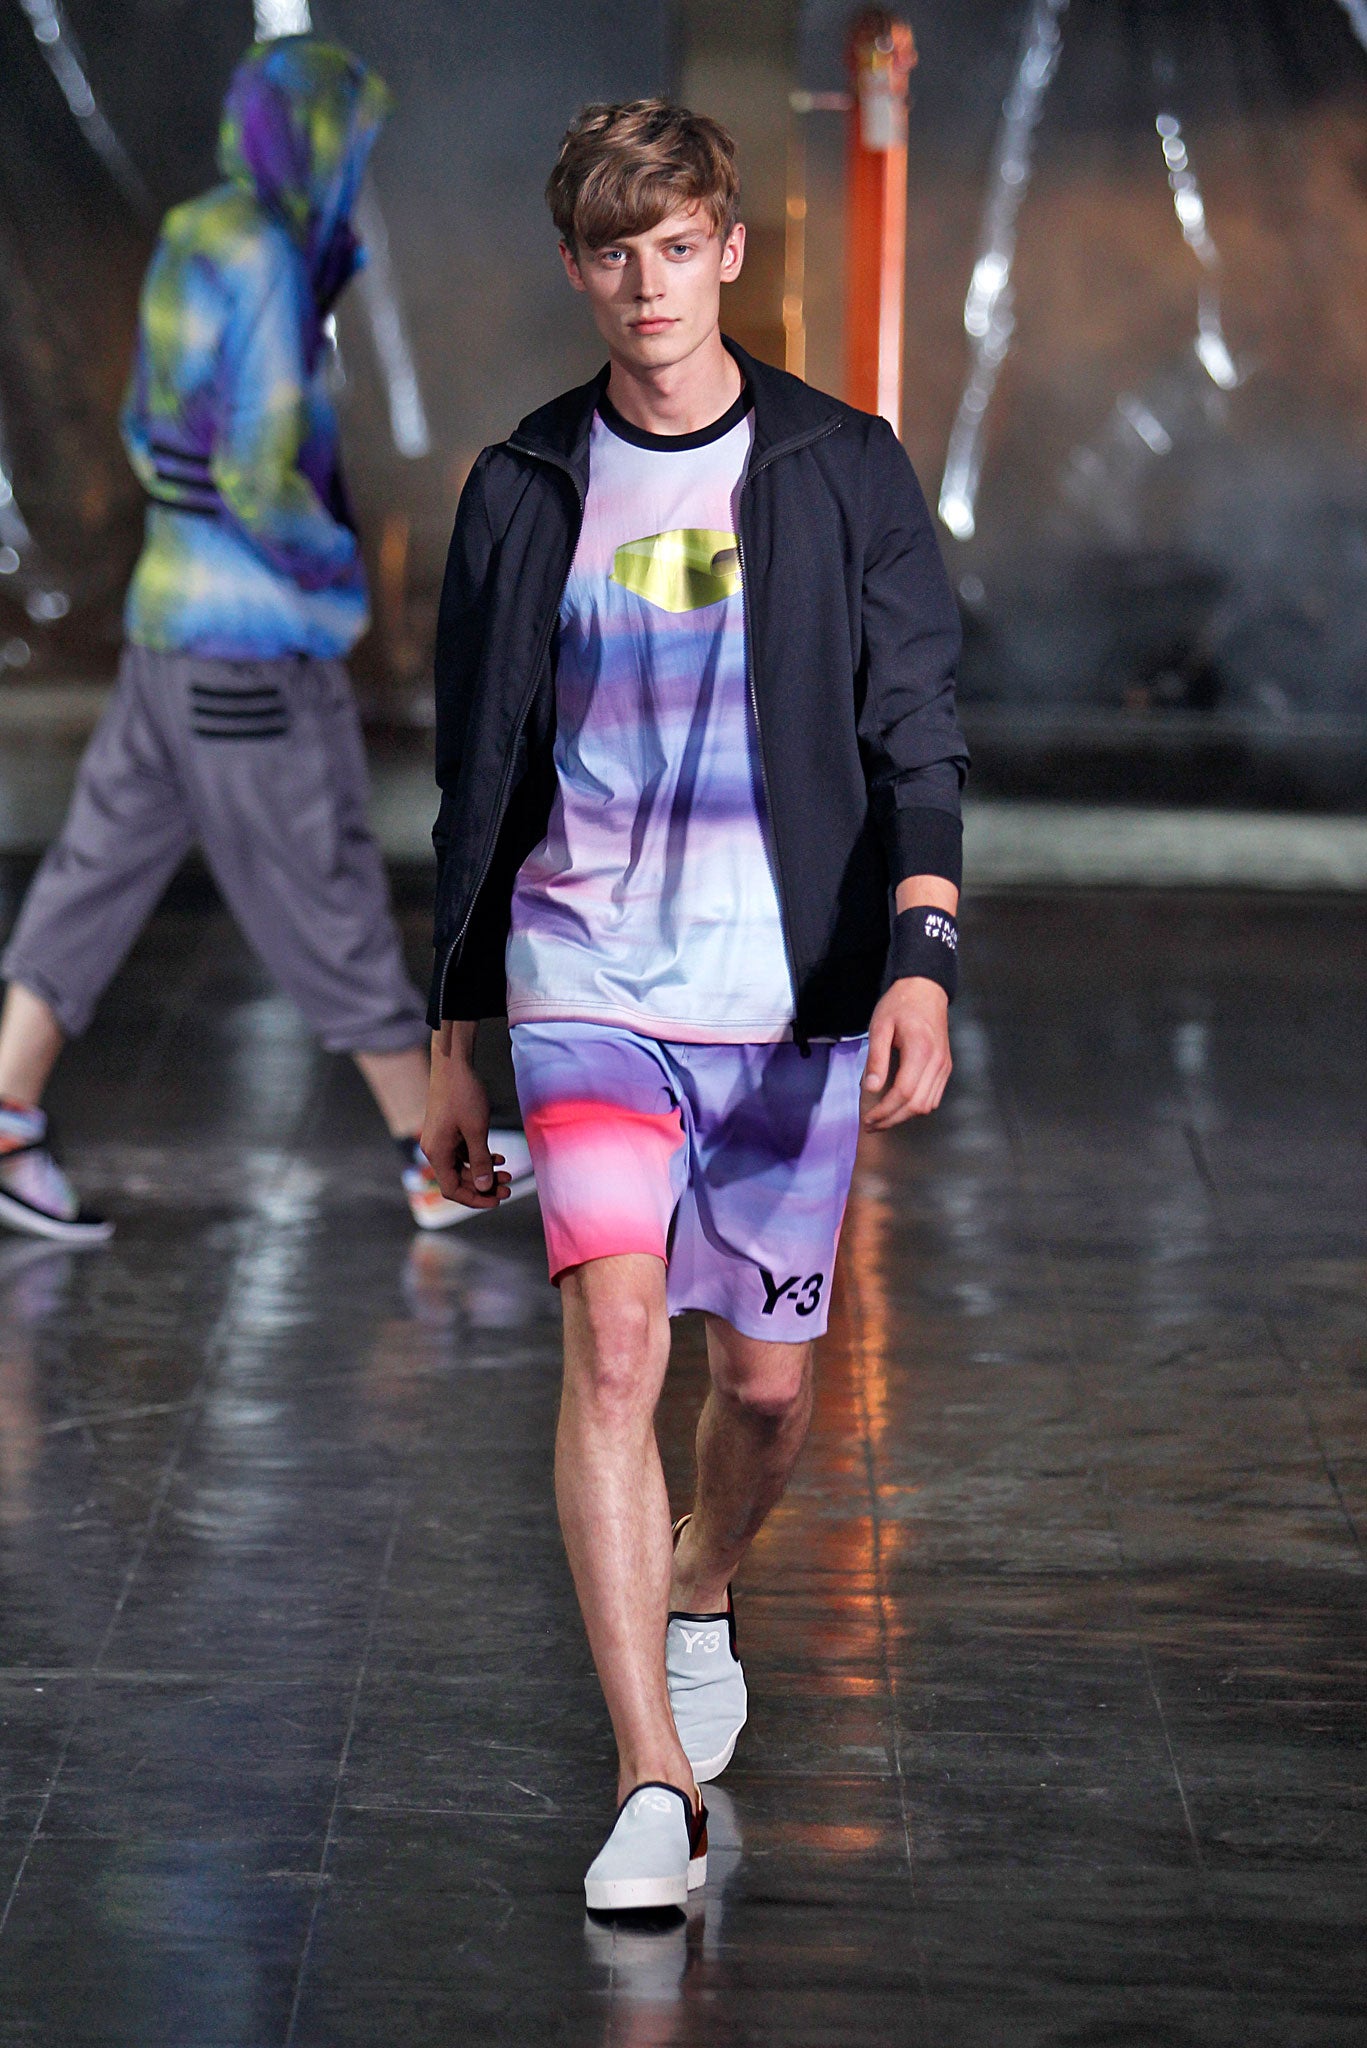 Playful: The Adidas Y3 spring/summer 2014 collection